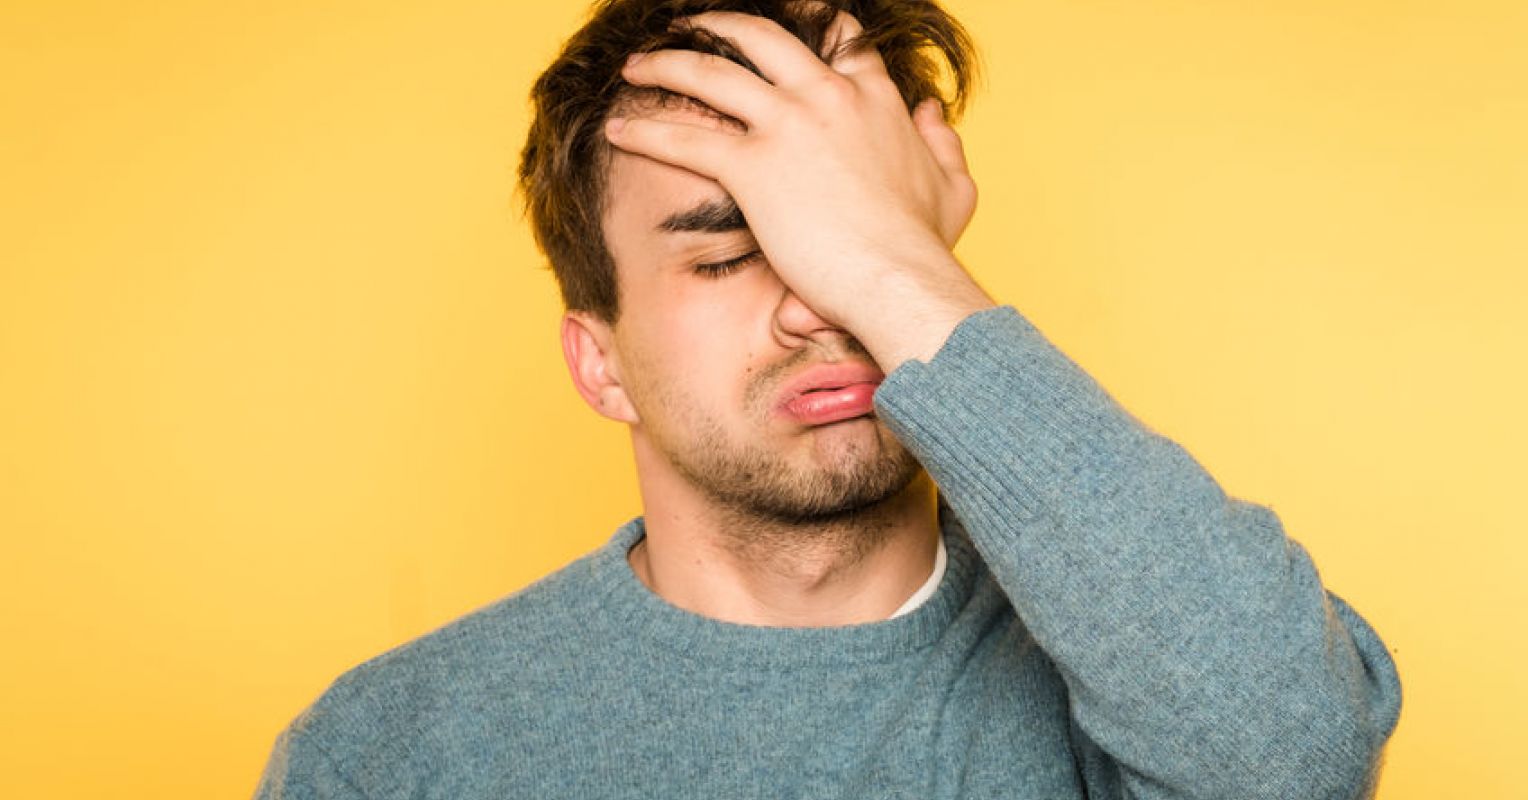 Frustration Tolerance and Its Role in Anger Arousal | Psychology Today